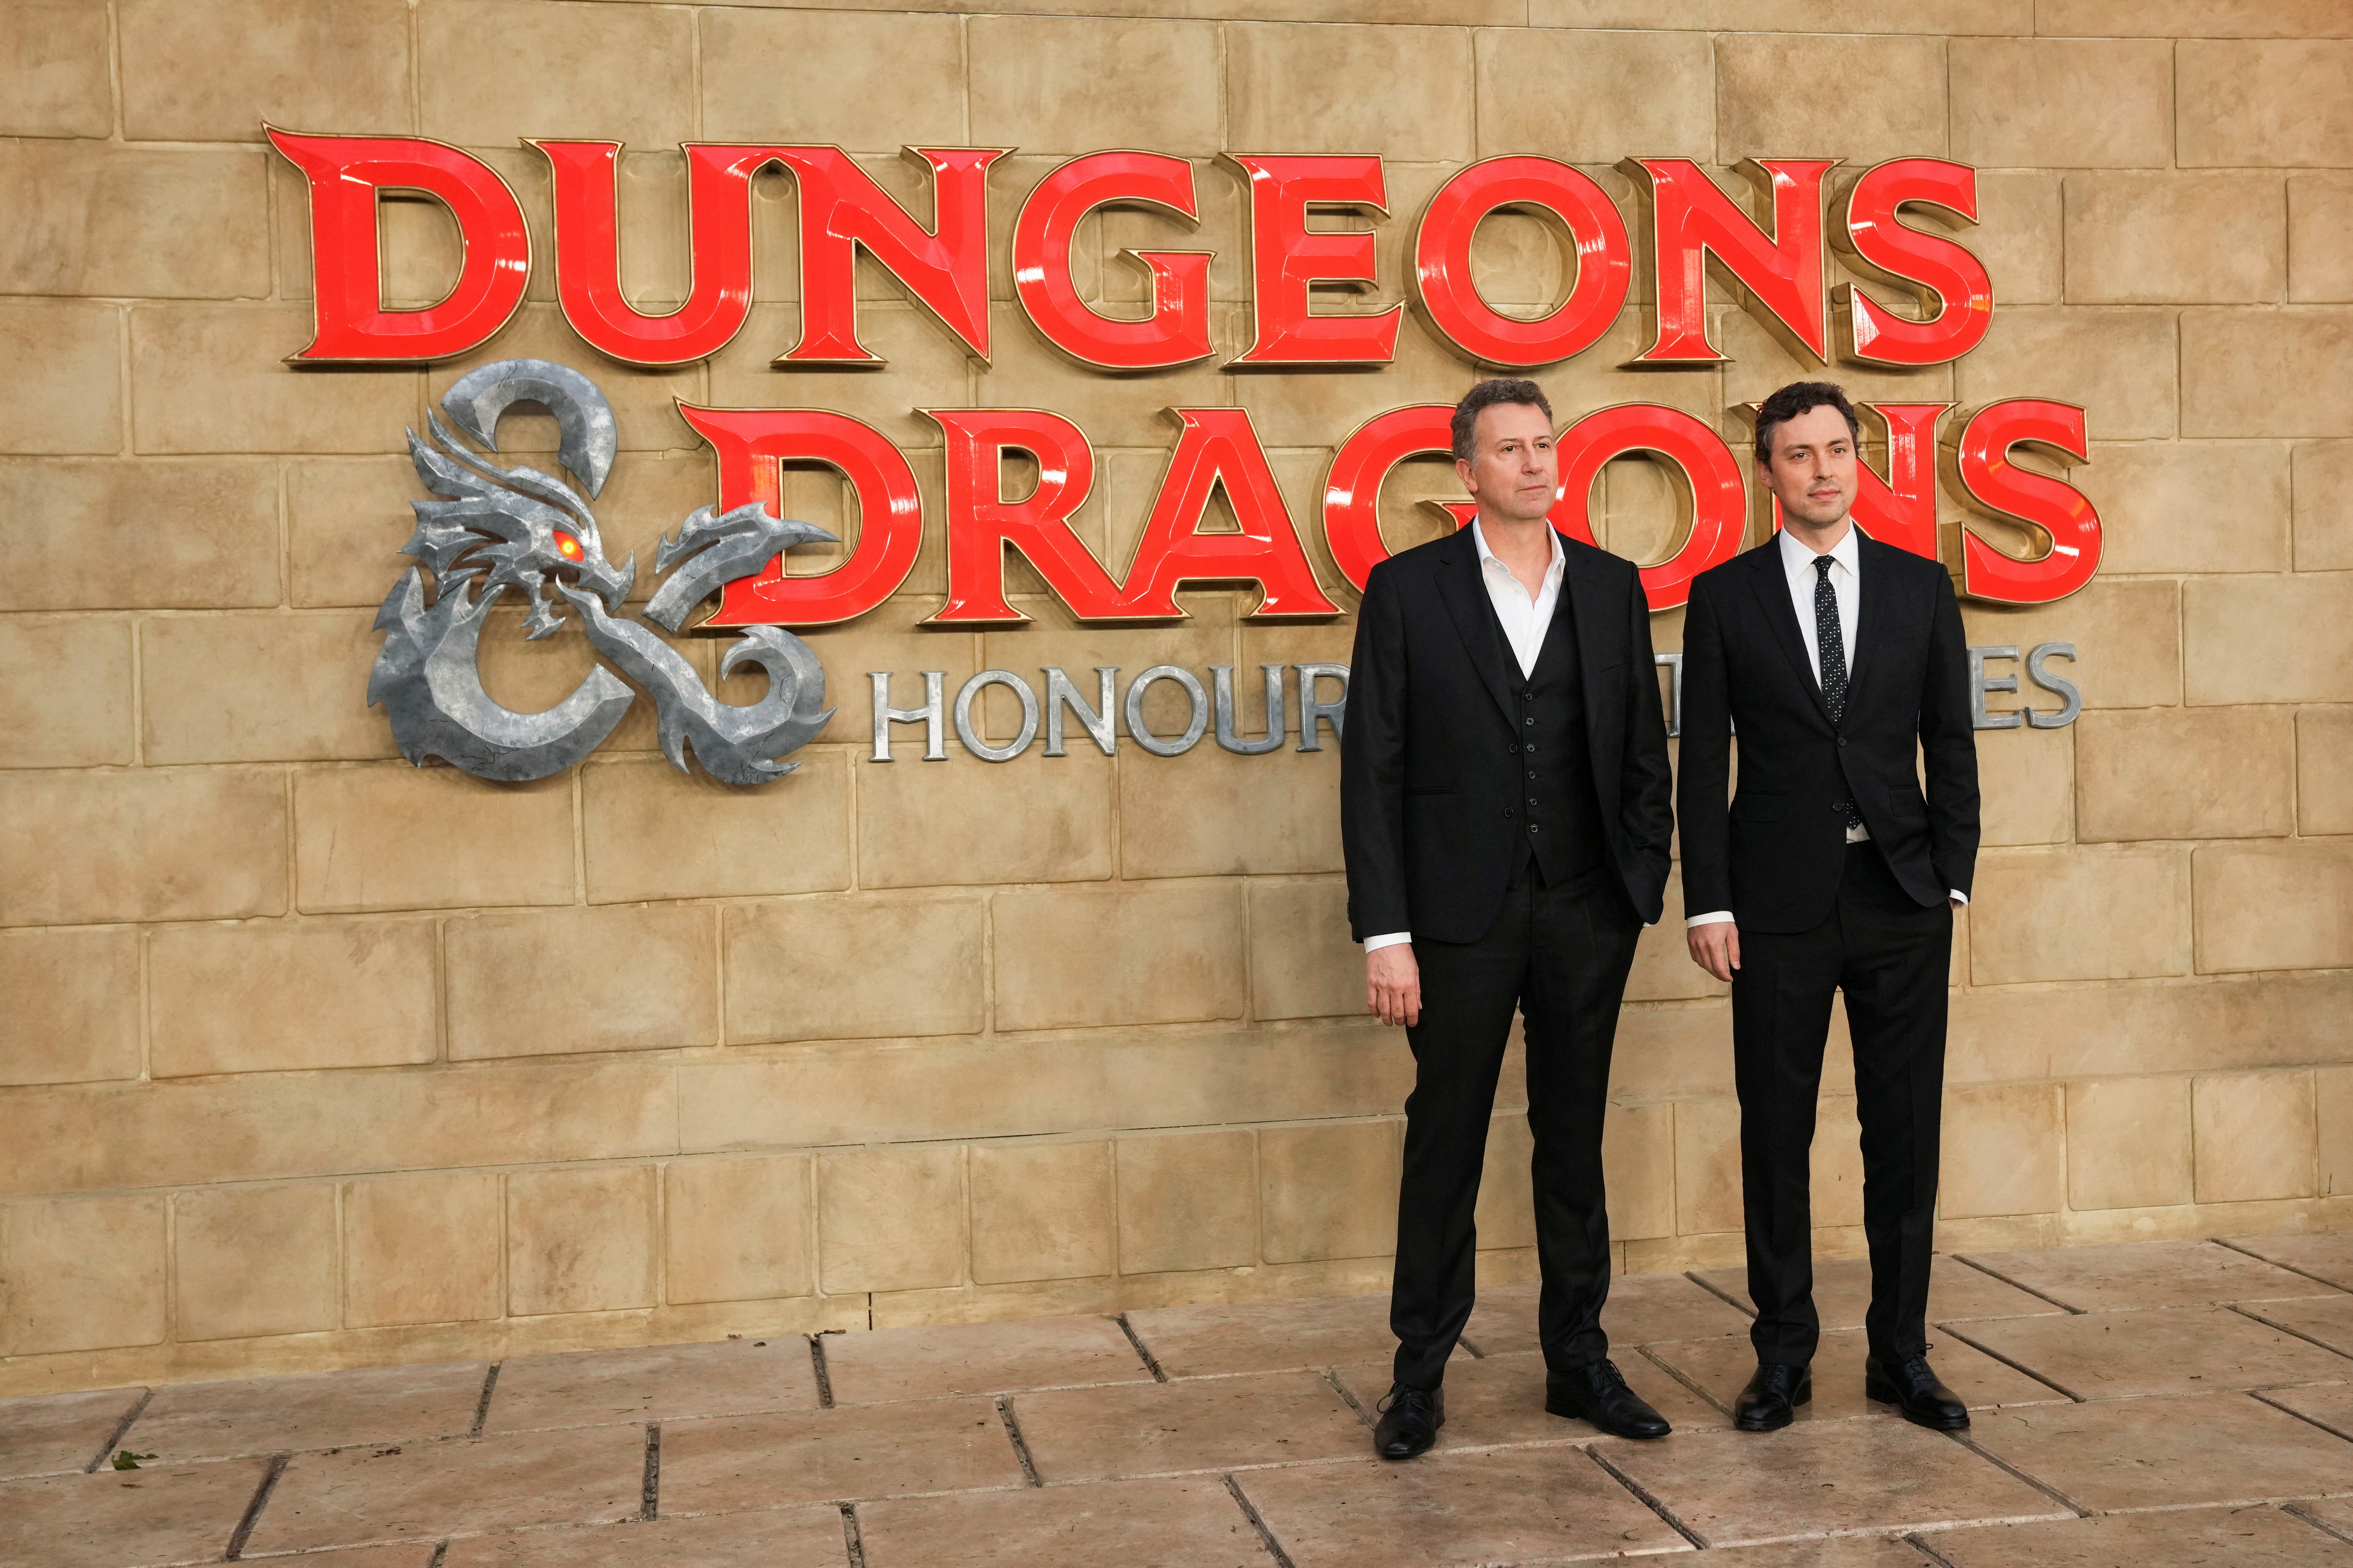 'Dungeons & Dragons: Honour Among Thieves' premieres in London